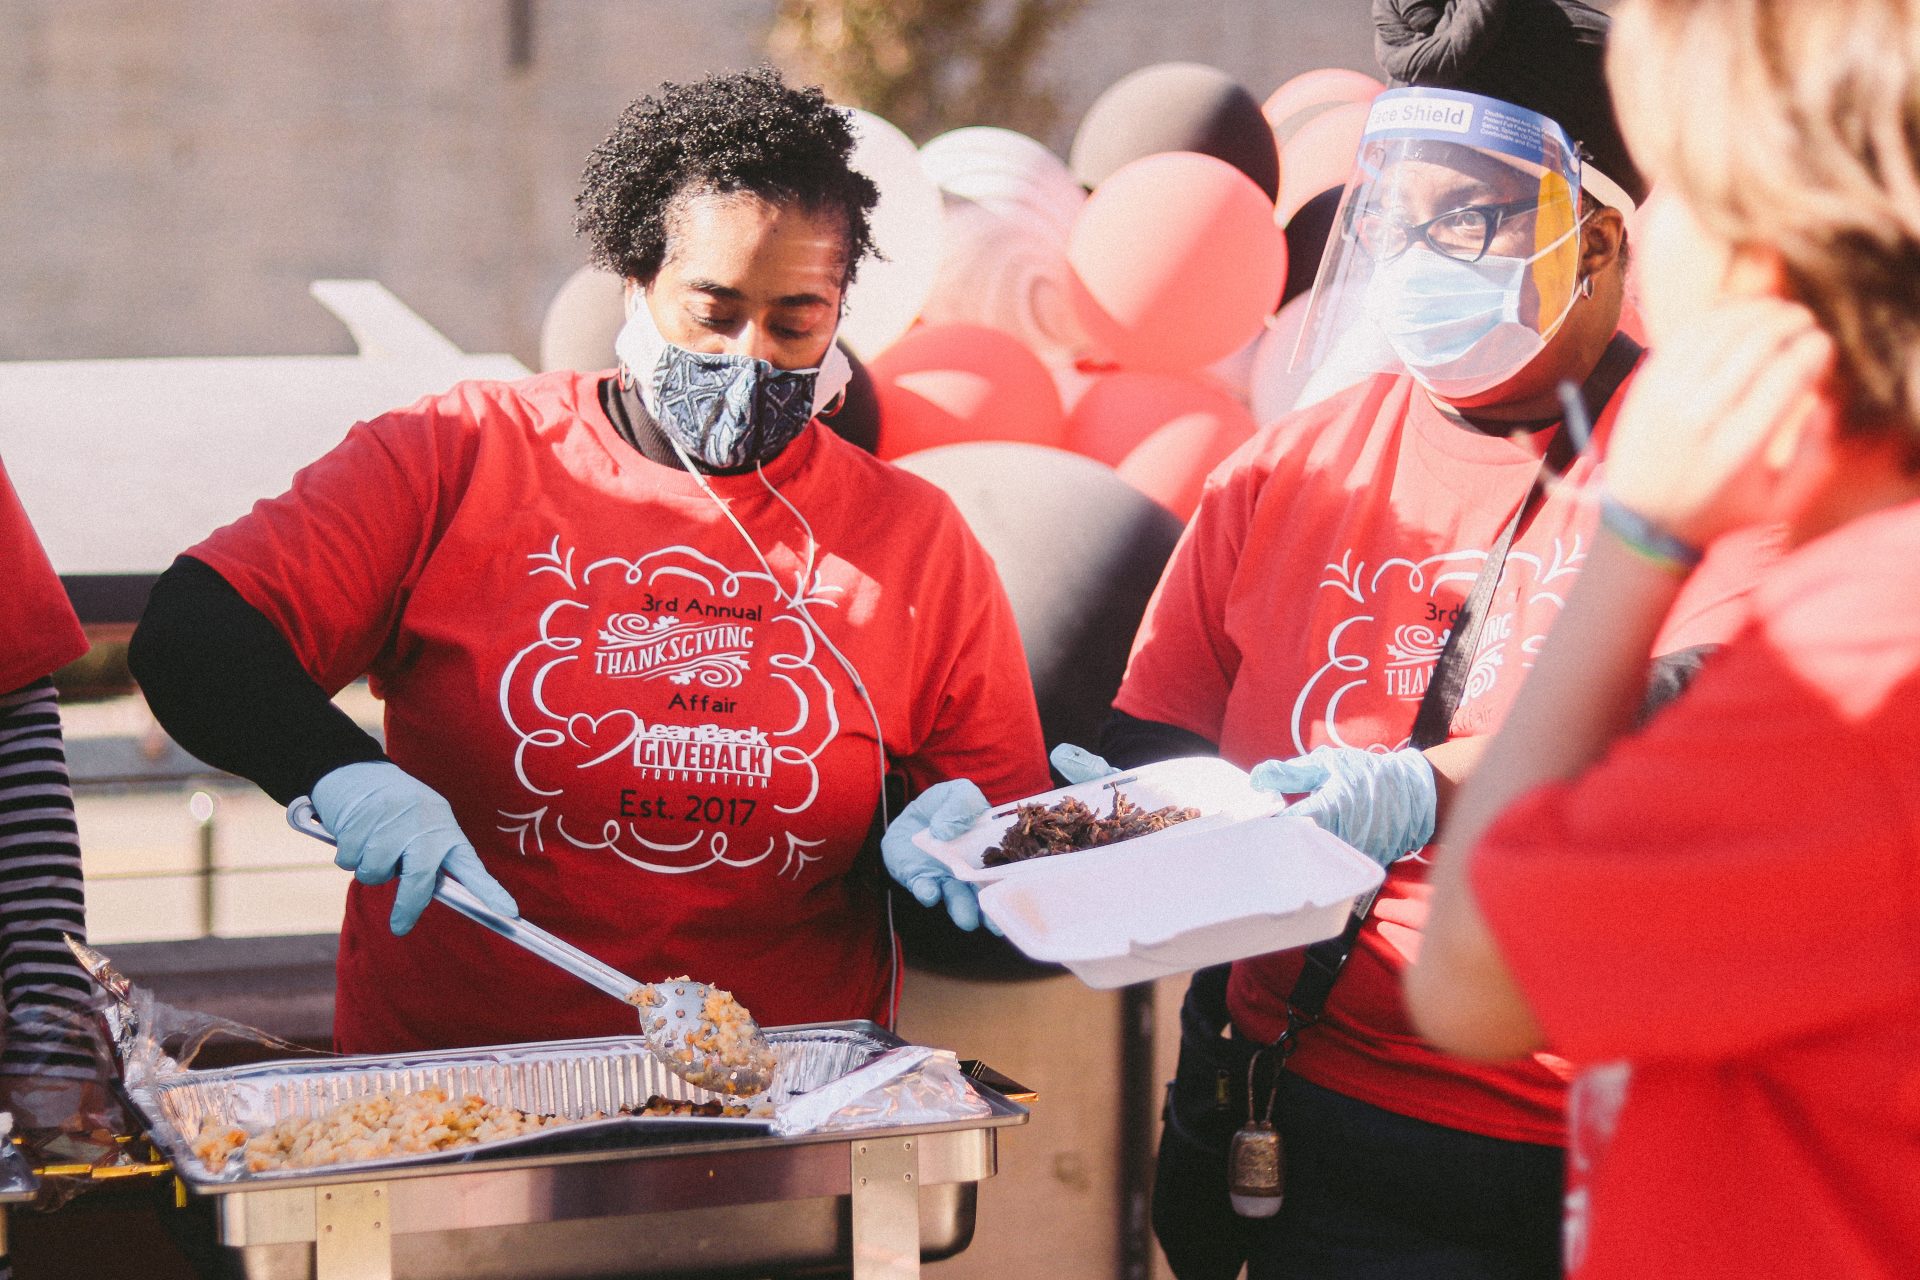 A woman in a mask puts food into a styrofoam tray during the 2021 LeanBack Give Back Thanksgiving event.